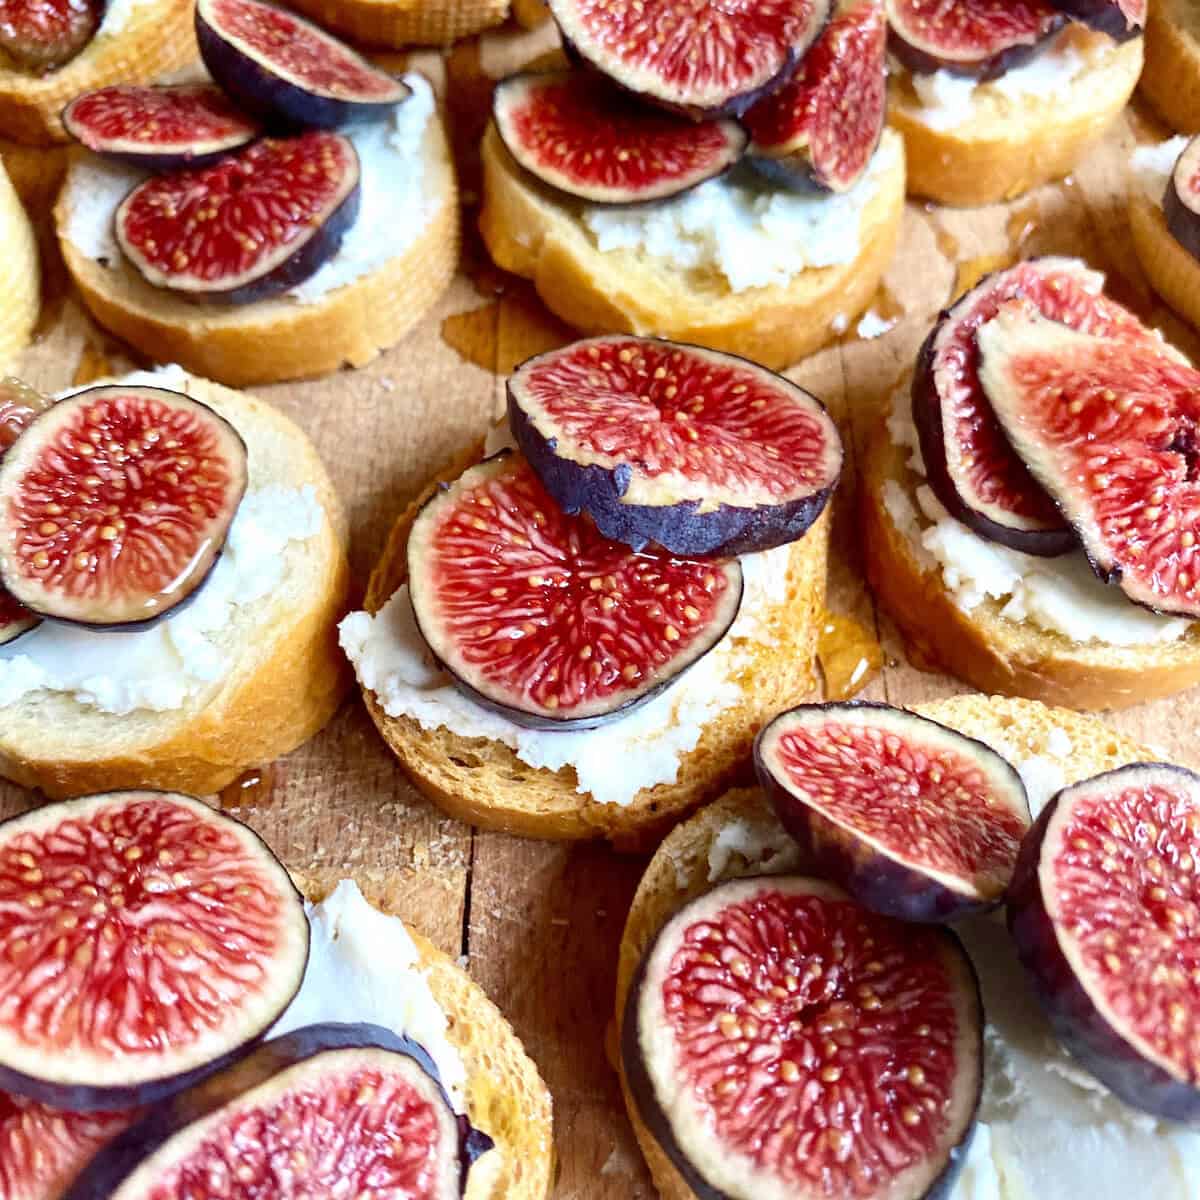 Goat cheese and figs on crostini at a French wines and cheese tasting event.